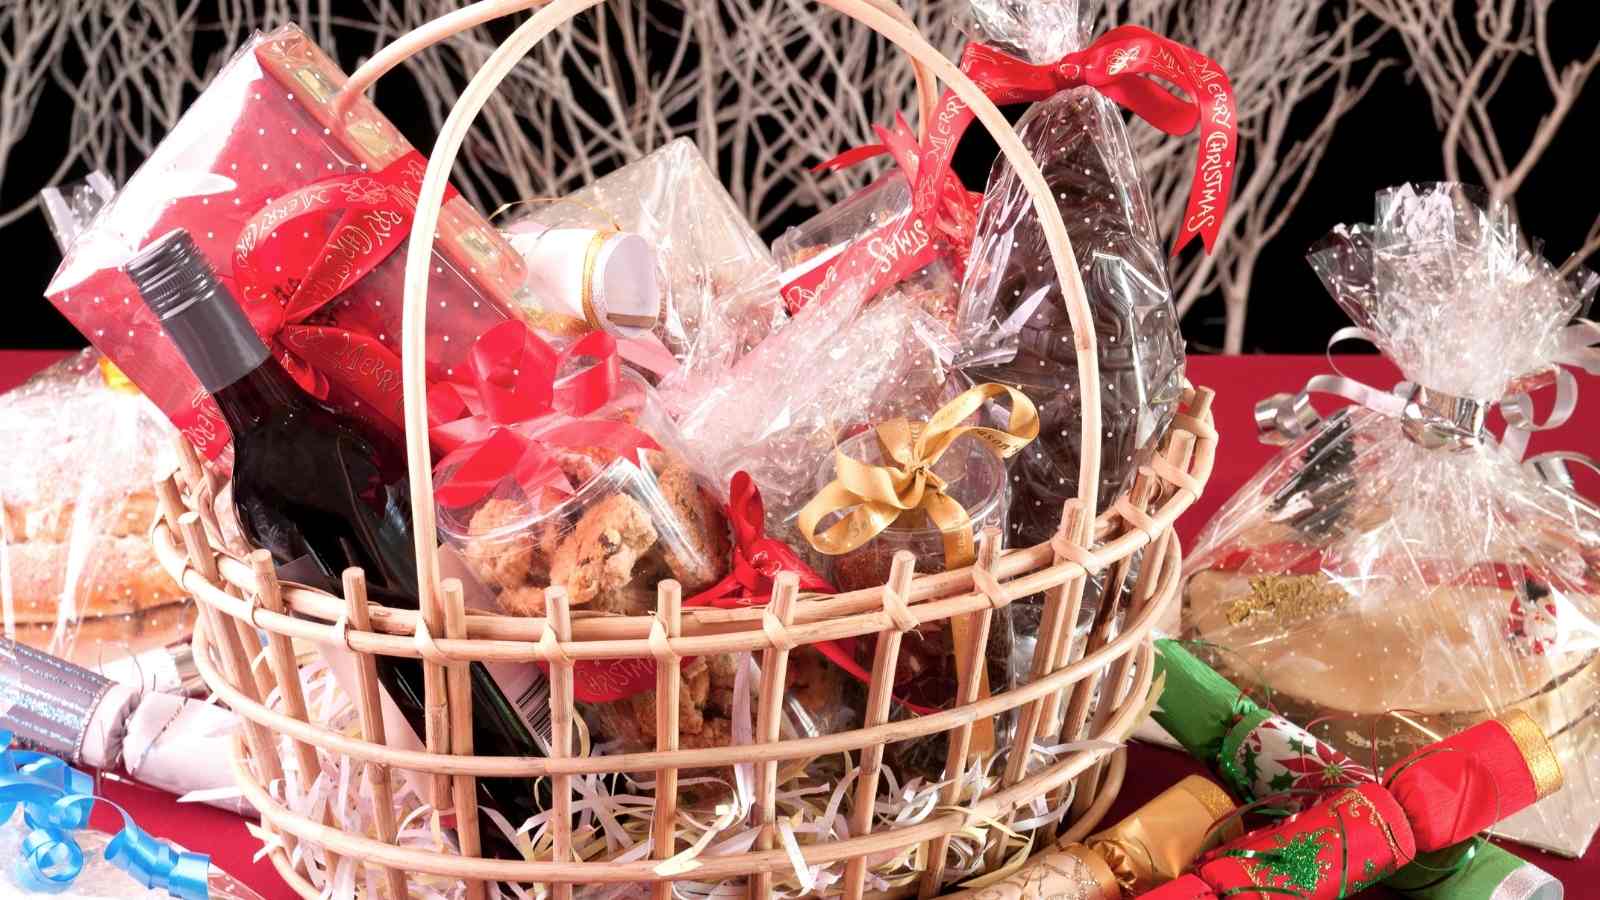 Hampers Make a Great Gift